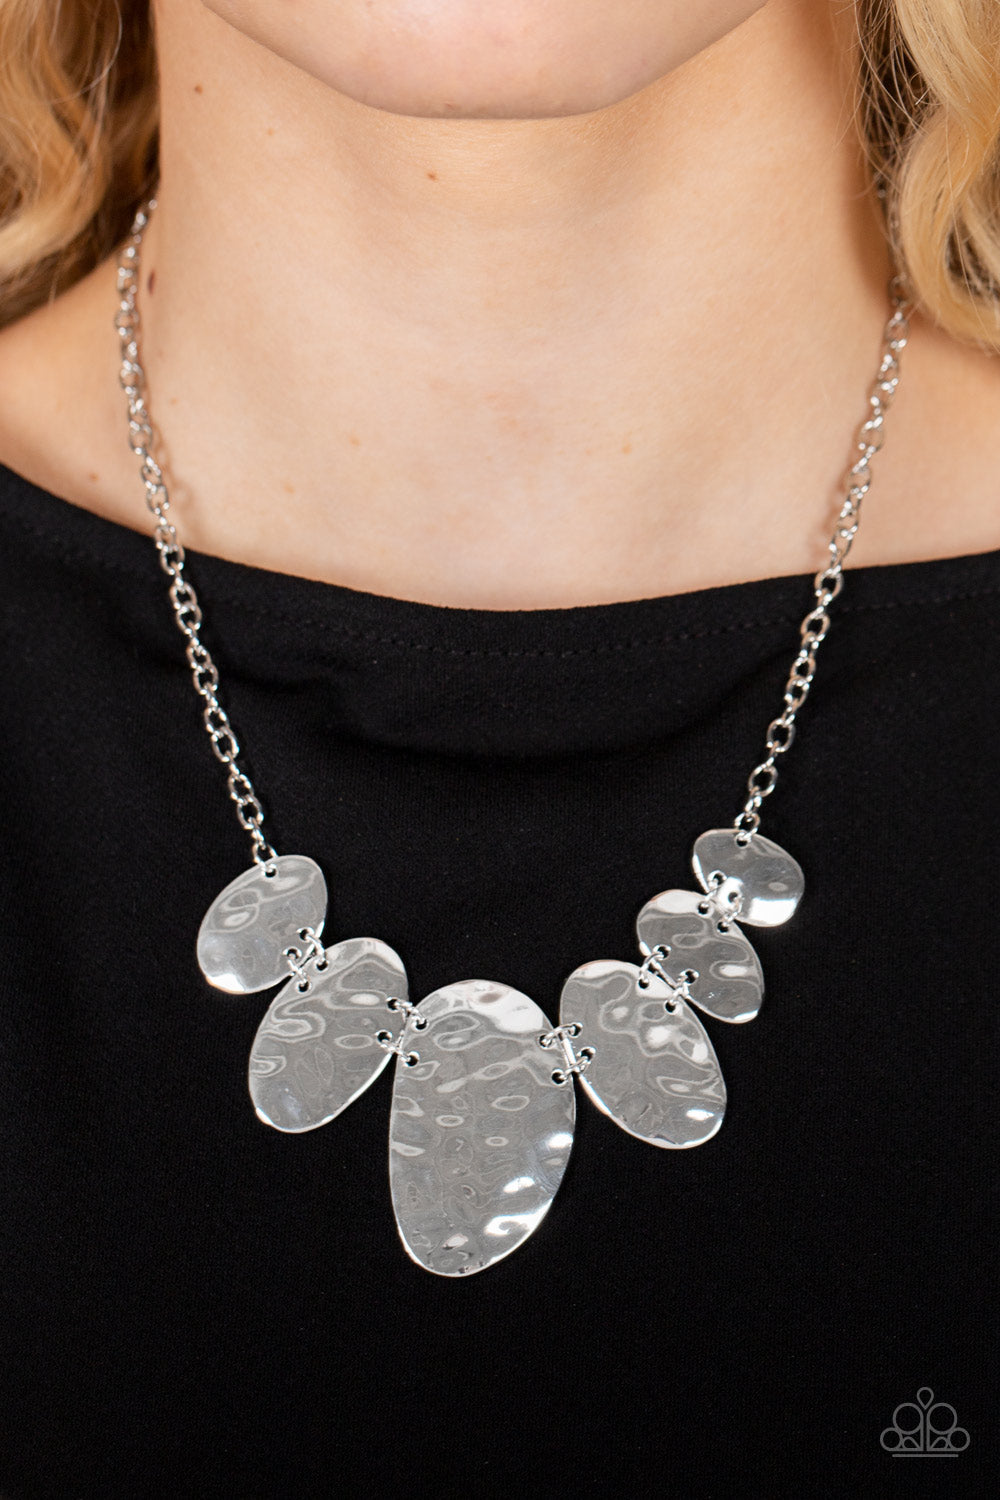 Paparazzi Accessories - Cave Crawl - Silver Necklaces hammered in eye-catching textures, a glistening collection of asymmetrical silver ovals gradually increase in size as they delicately link below the collar for an artisan inspired fashion. Features an adjustable clasp closure.  Sold as one individual necklace. Includes one pair of matching earrings.